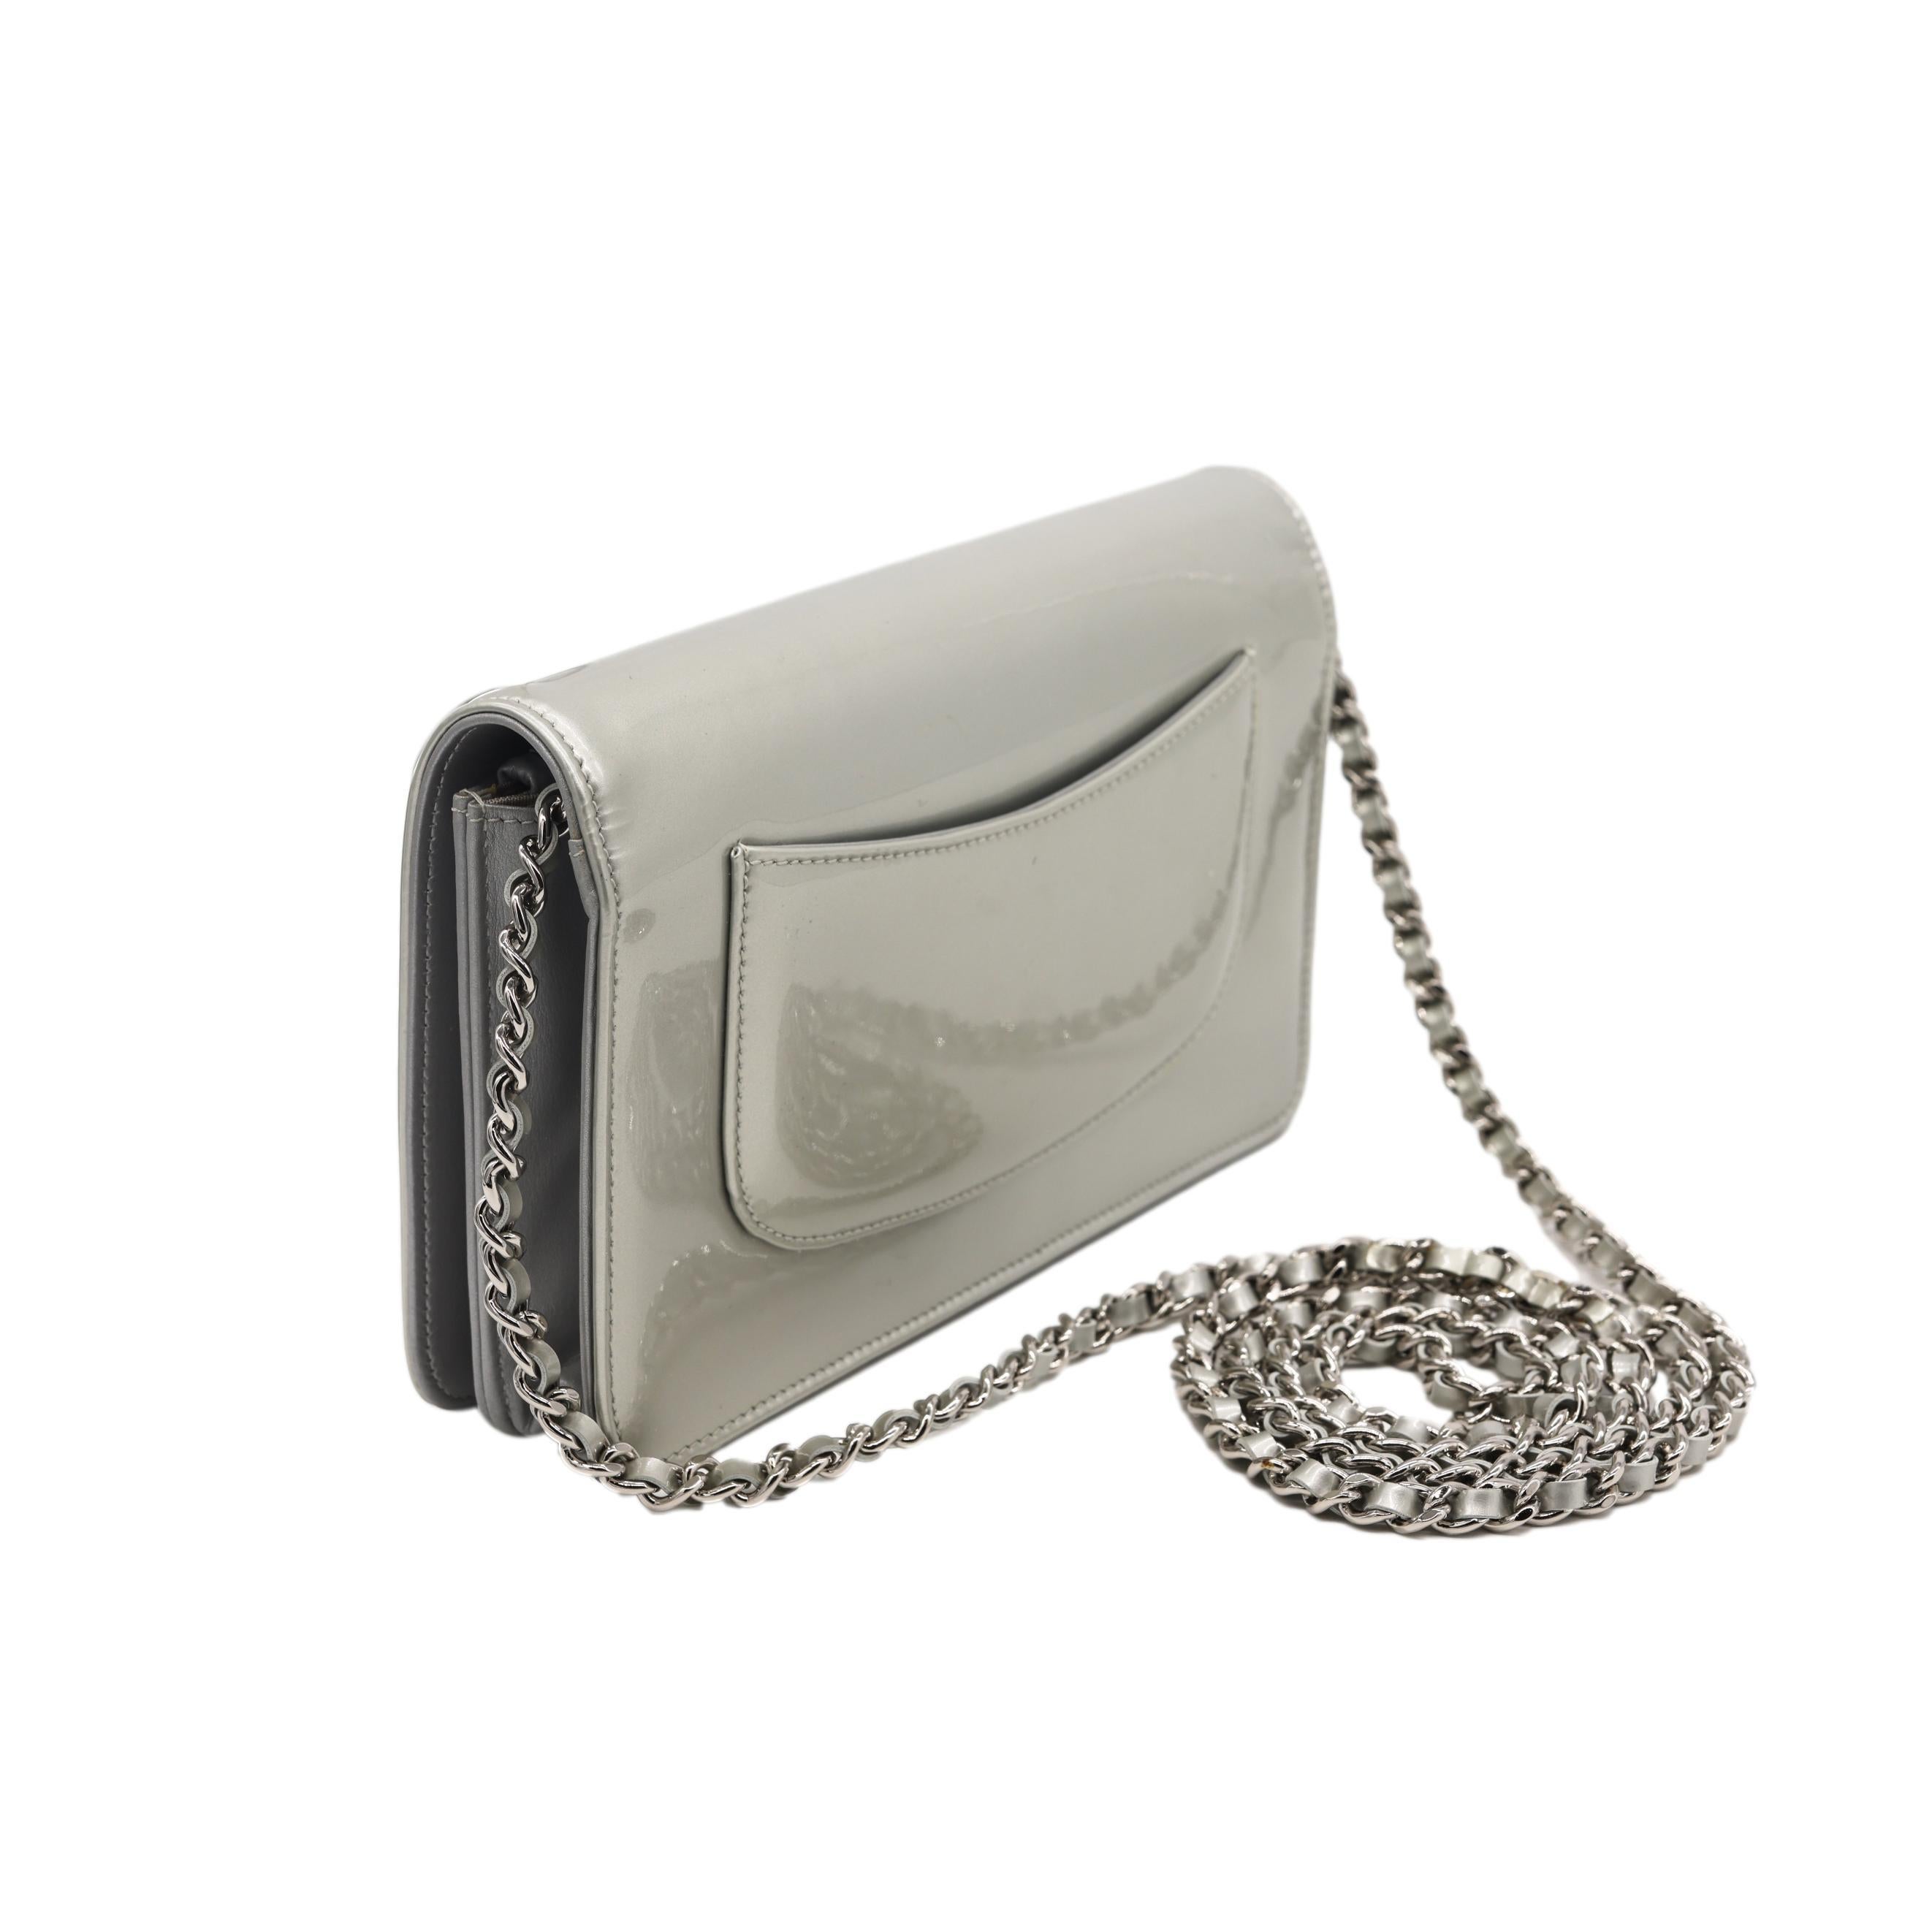 Chanel Silver Patent Leather Strass Wallet on Chain Clutch Crossbody Bag, 2009. 9